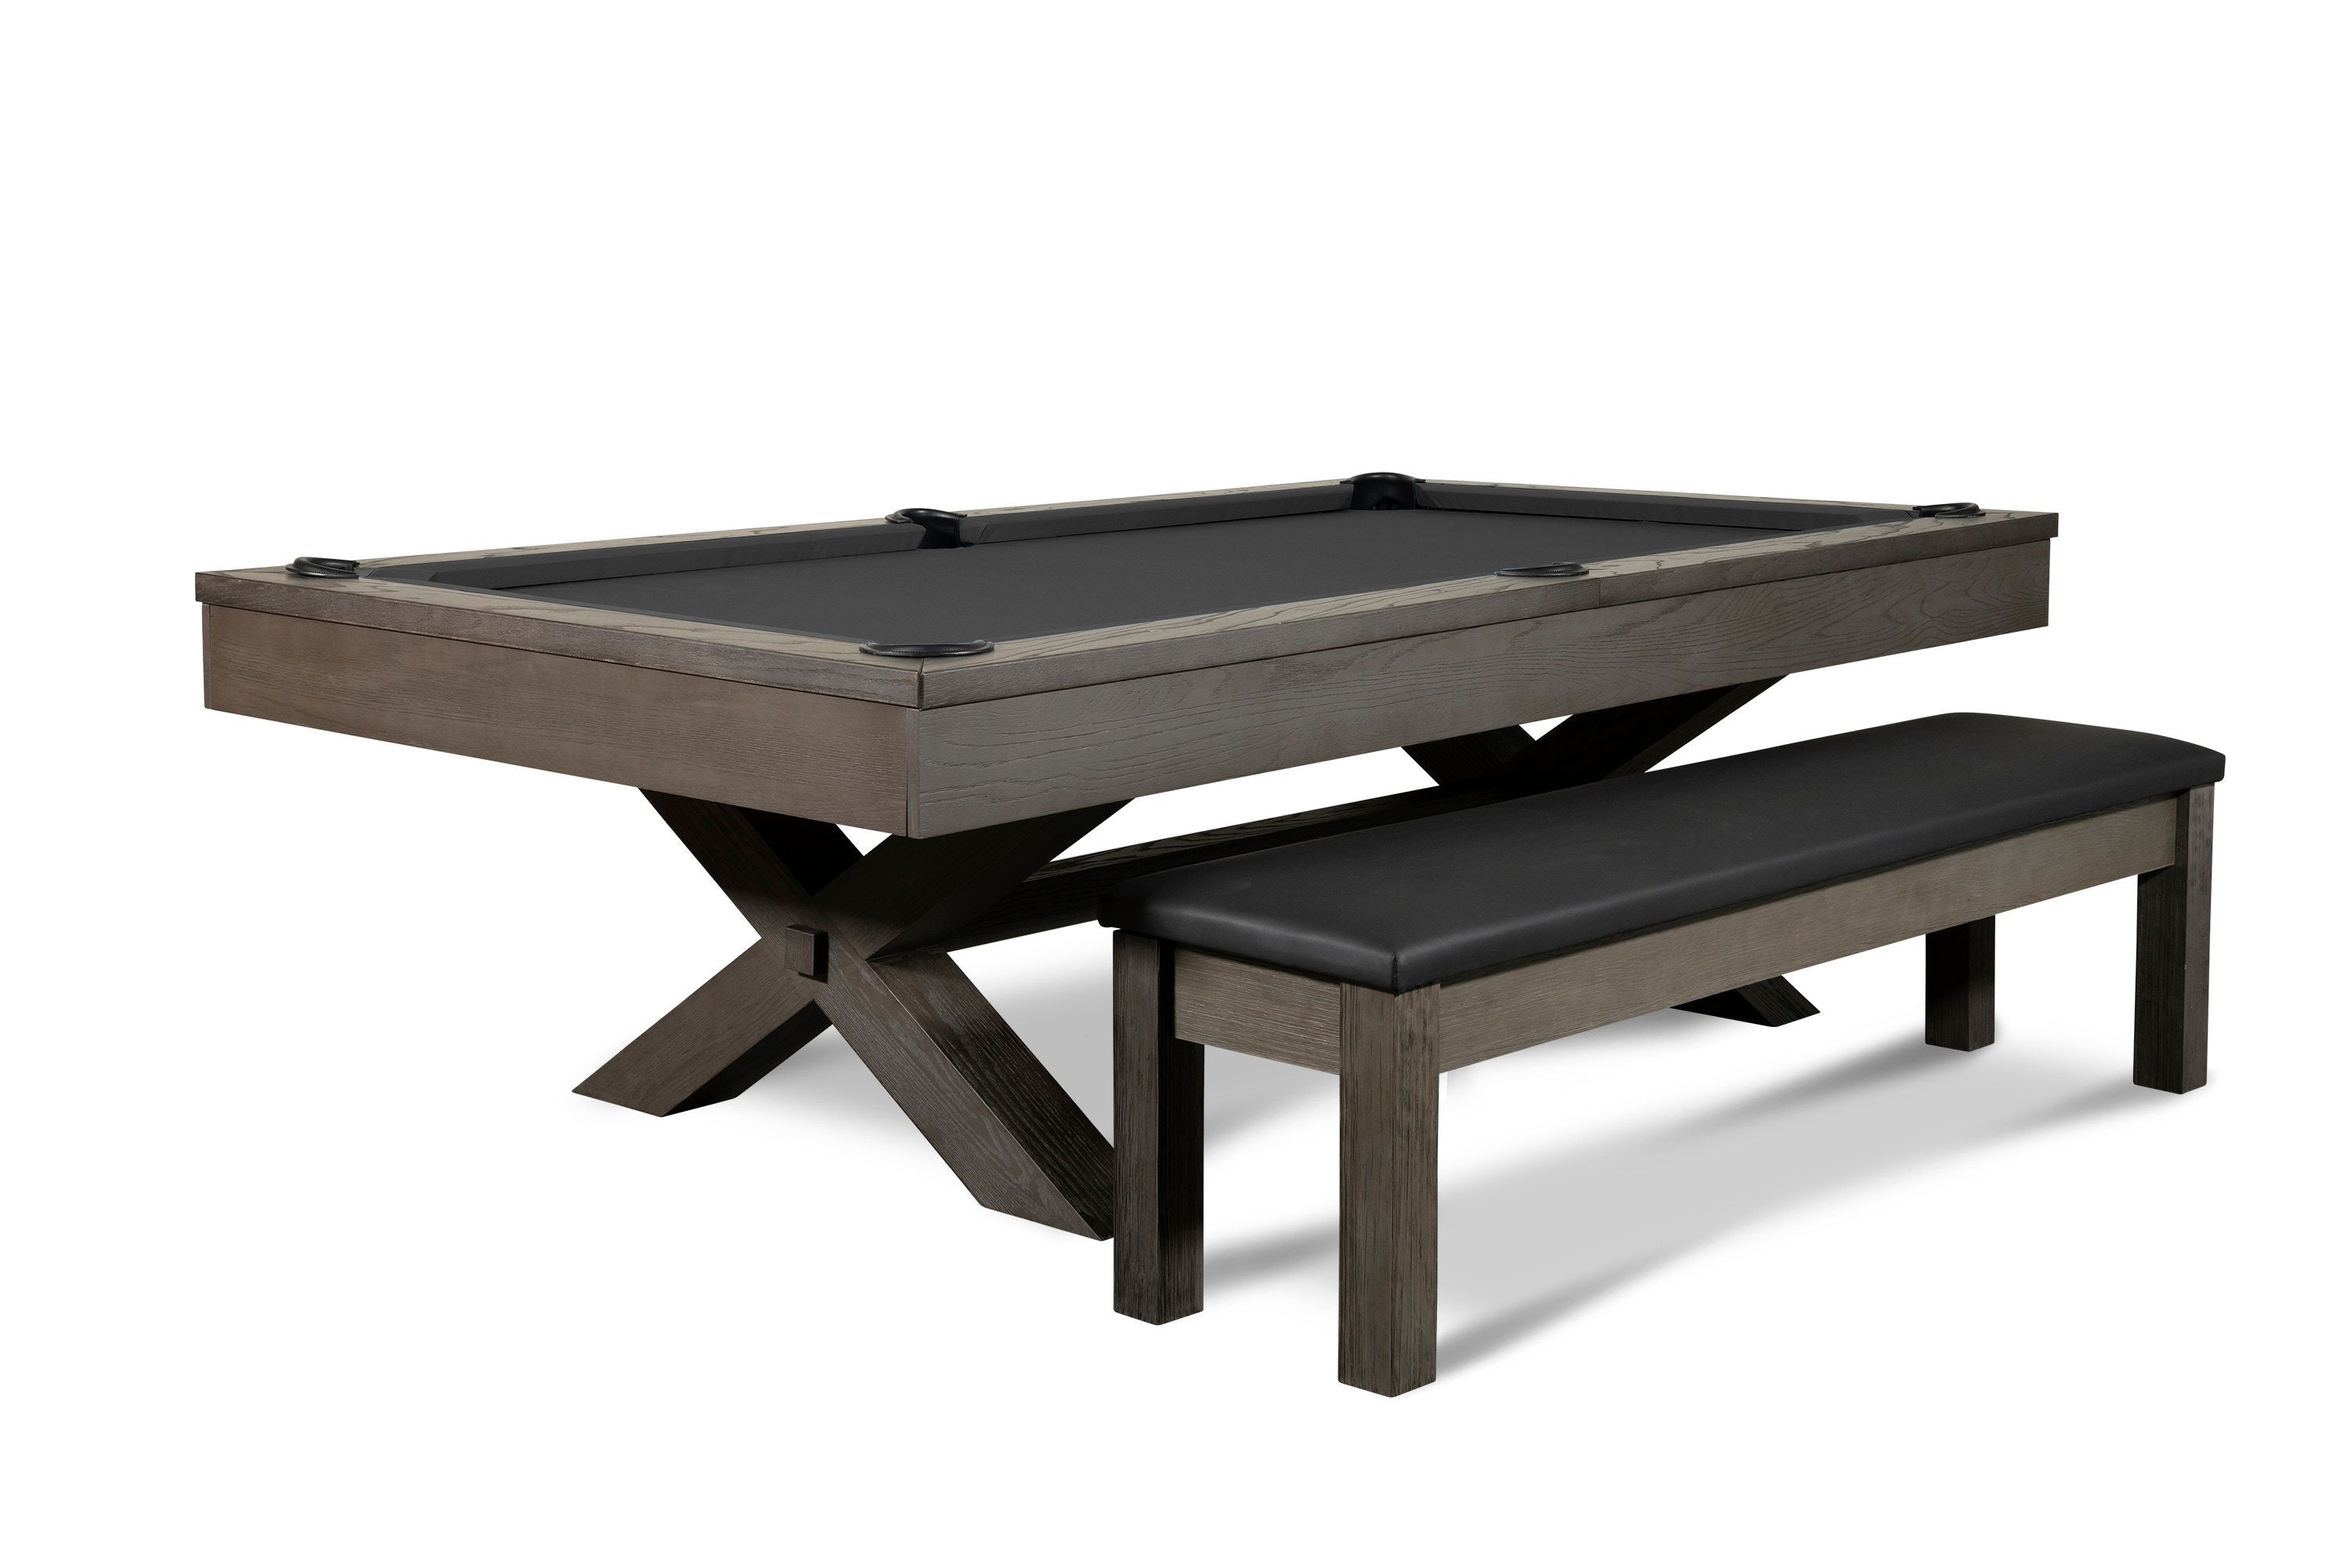 Nixon Billiards CrissyCross Slate Pool Table ISAF 90080/ISAF 90081 Charcoal Black Fabric With Matching Game Chair